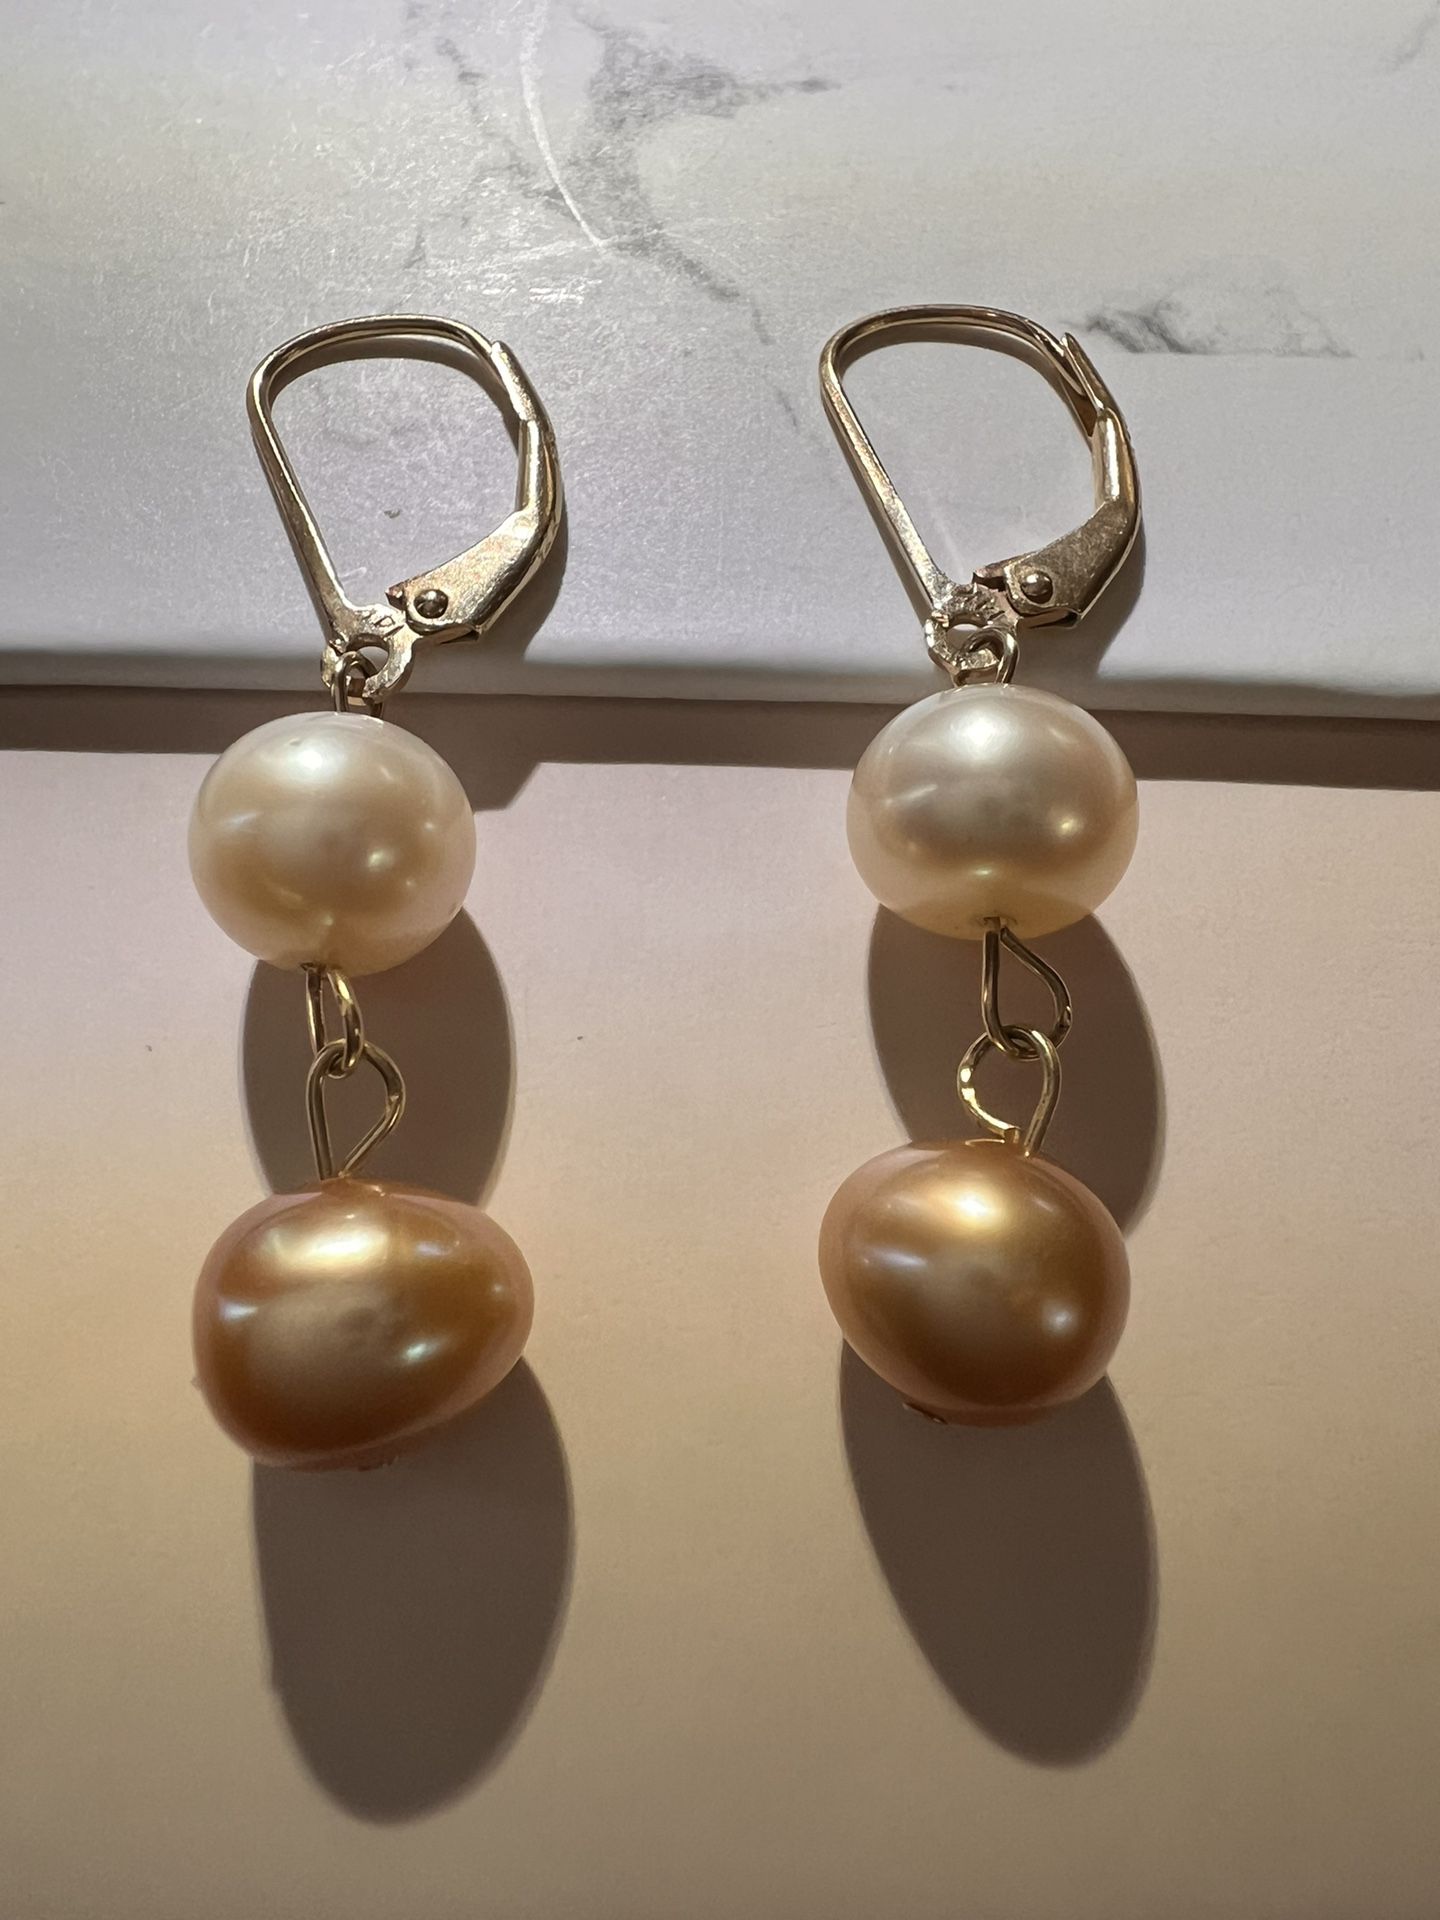 PEARLS EARRINGS IN 14K YELLOW GOLD HAND SELECTED FRESHWATER PEARLS 